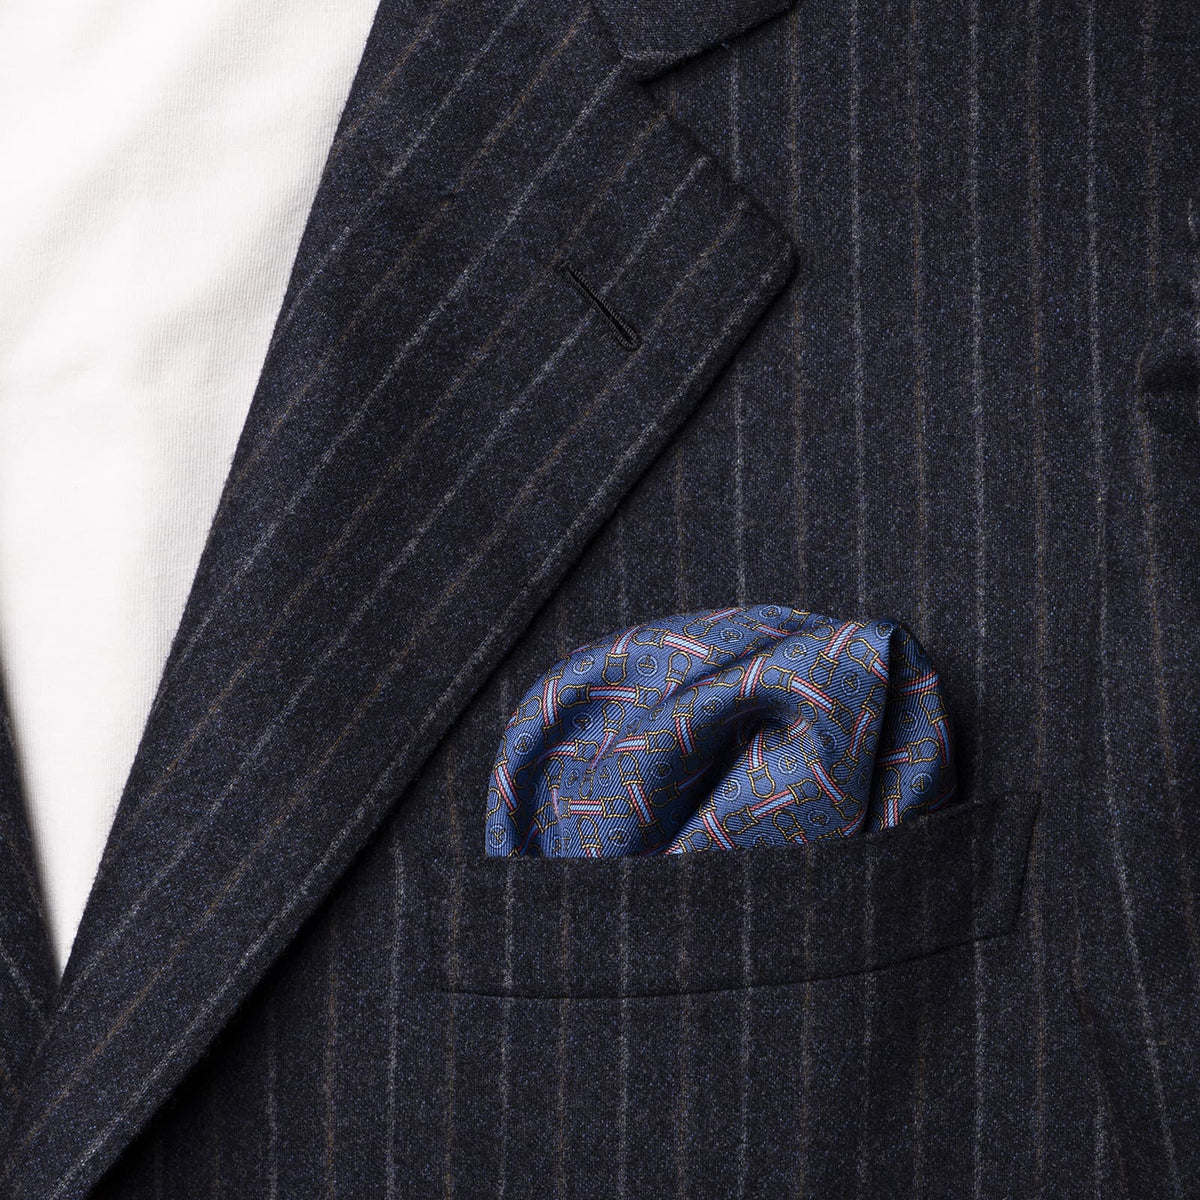 Pocket square blue with red details